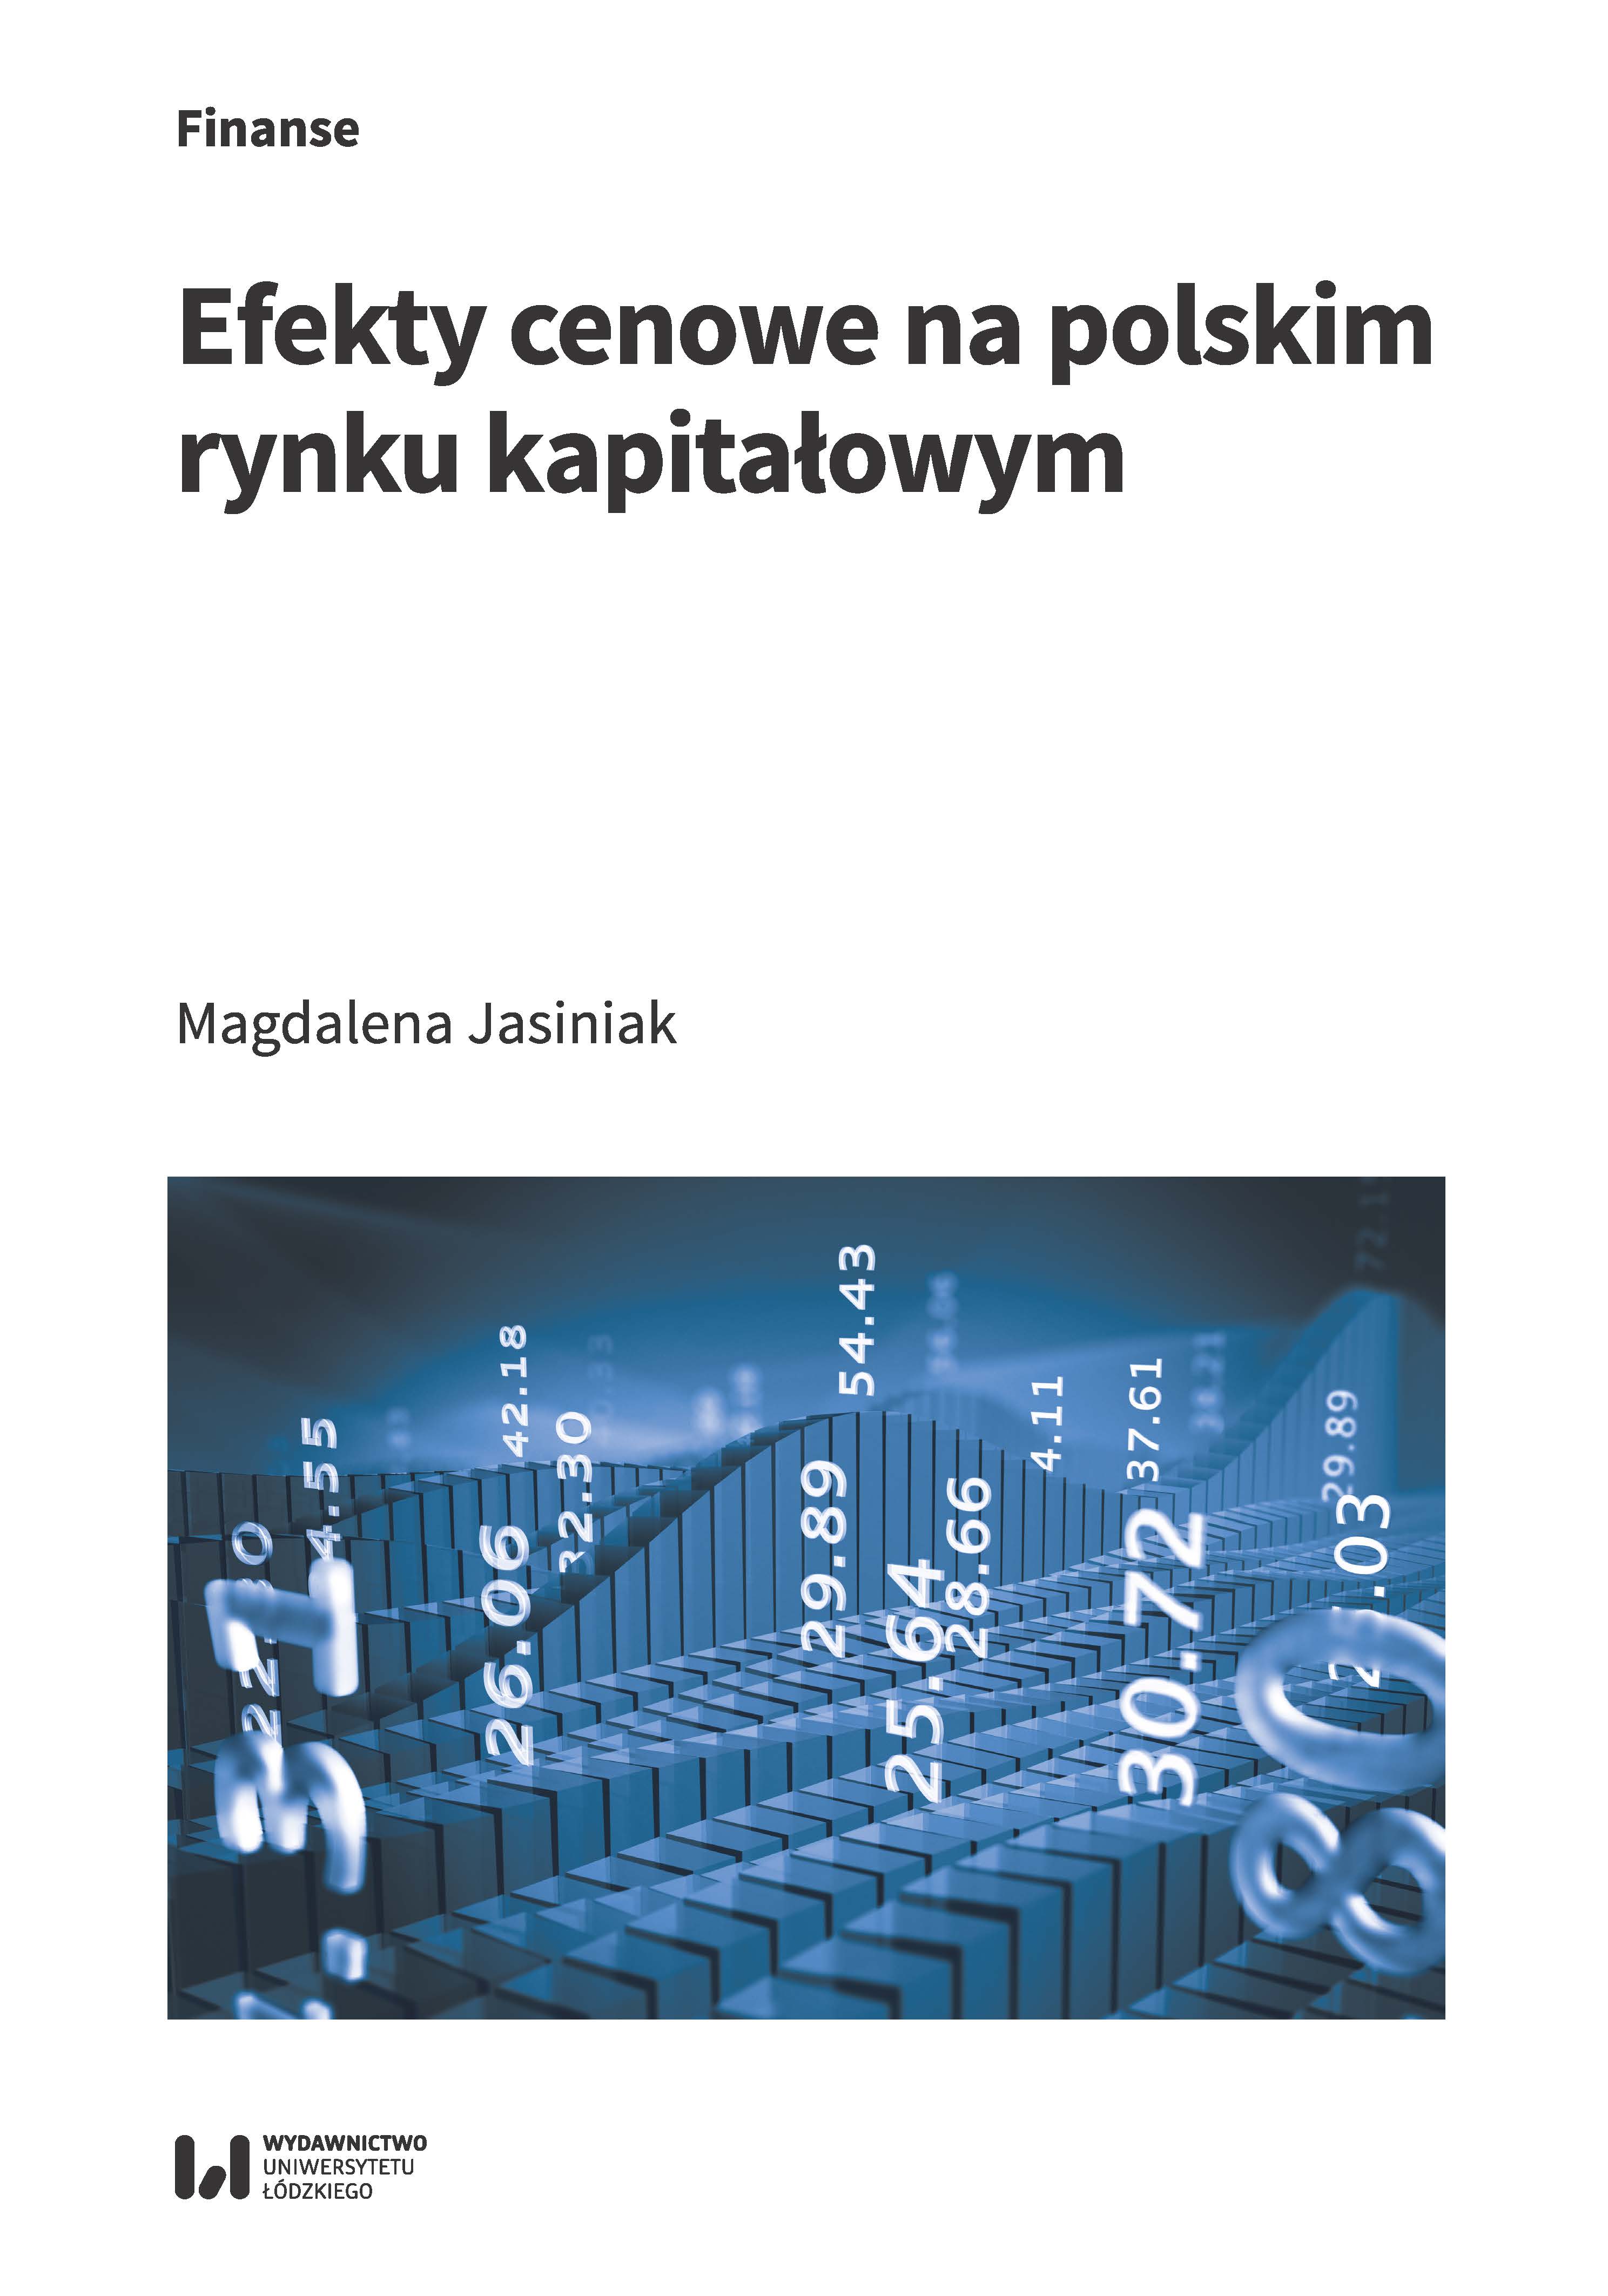 Price effects on Polish capital market Cover Image